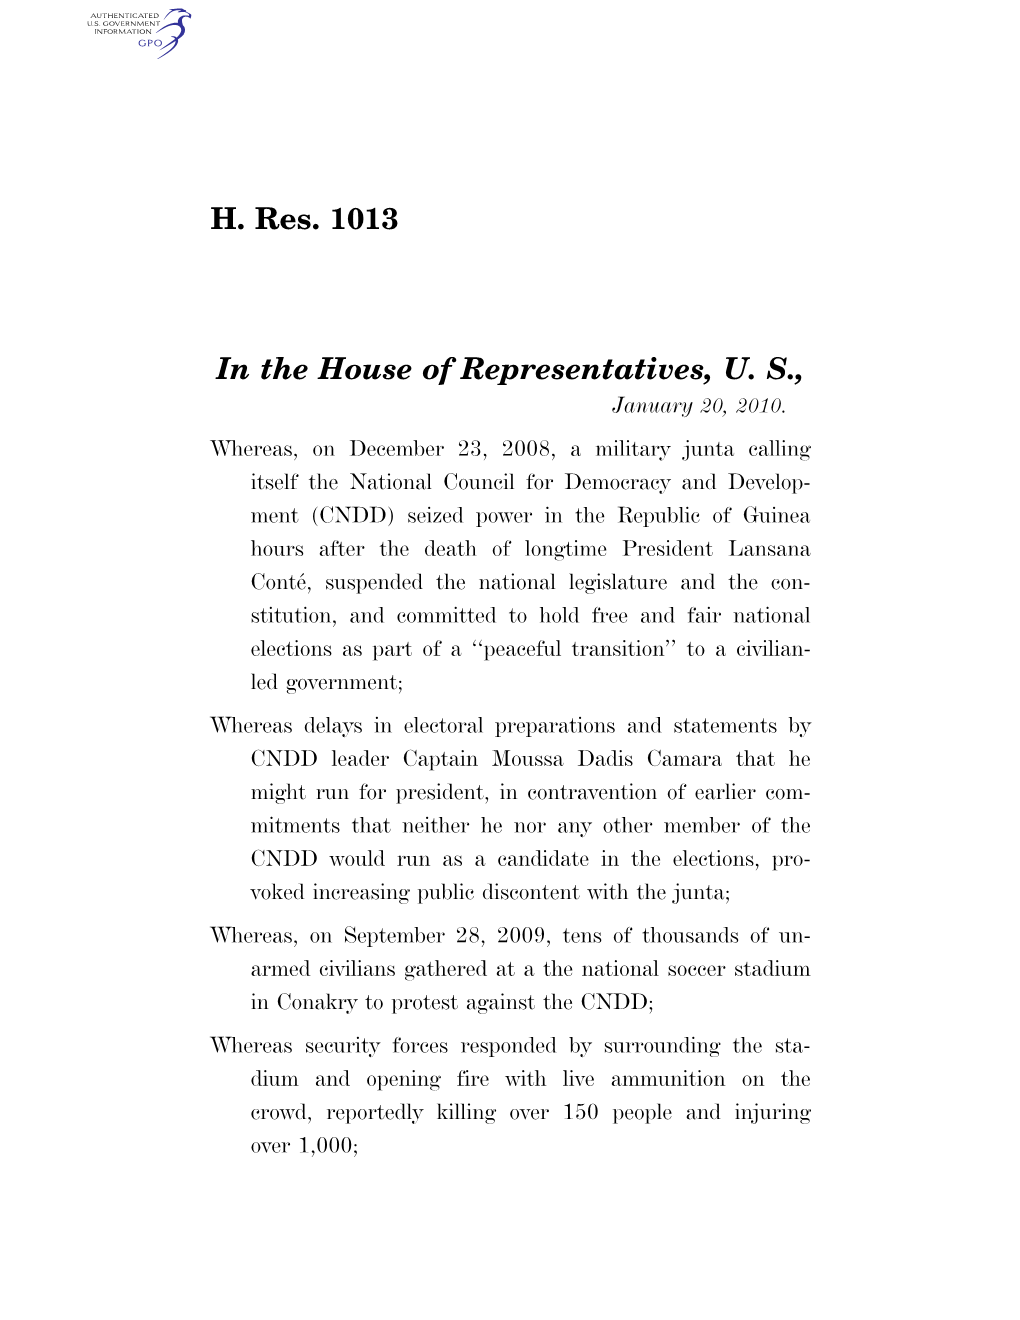 H. Res. 1013 in the House of Representatives